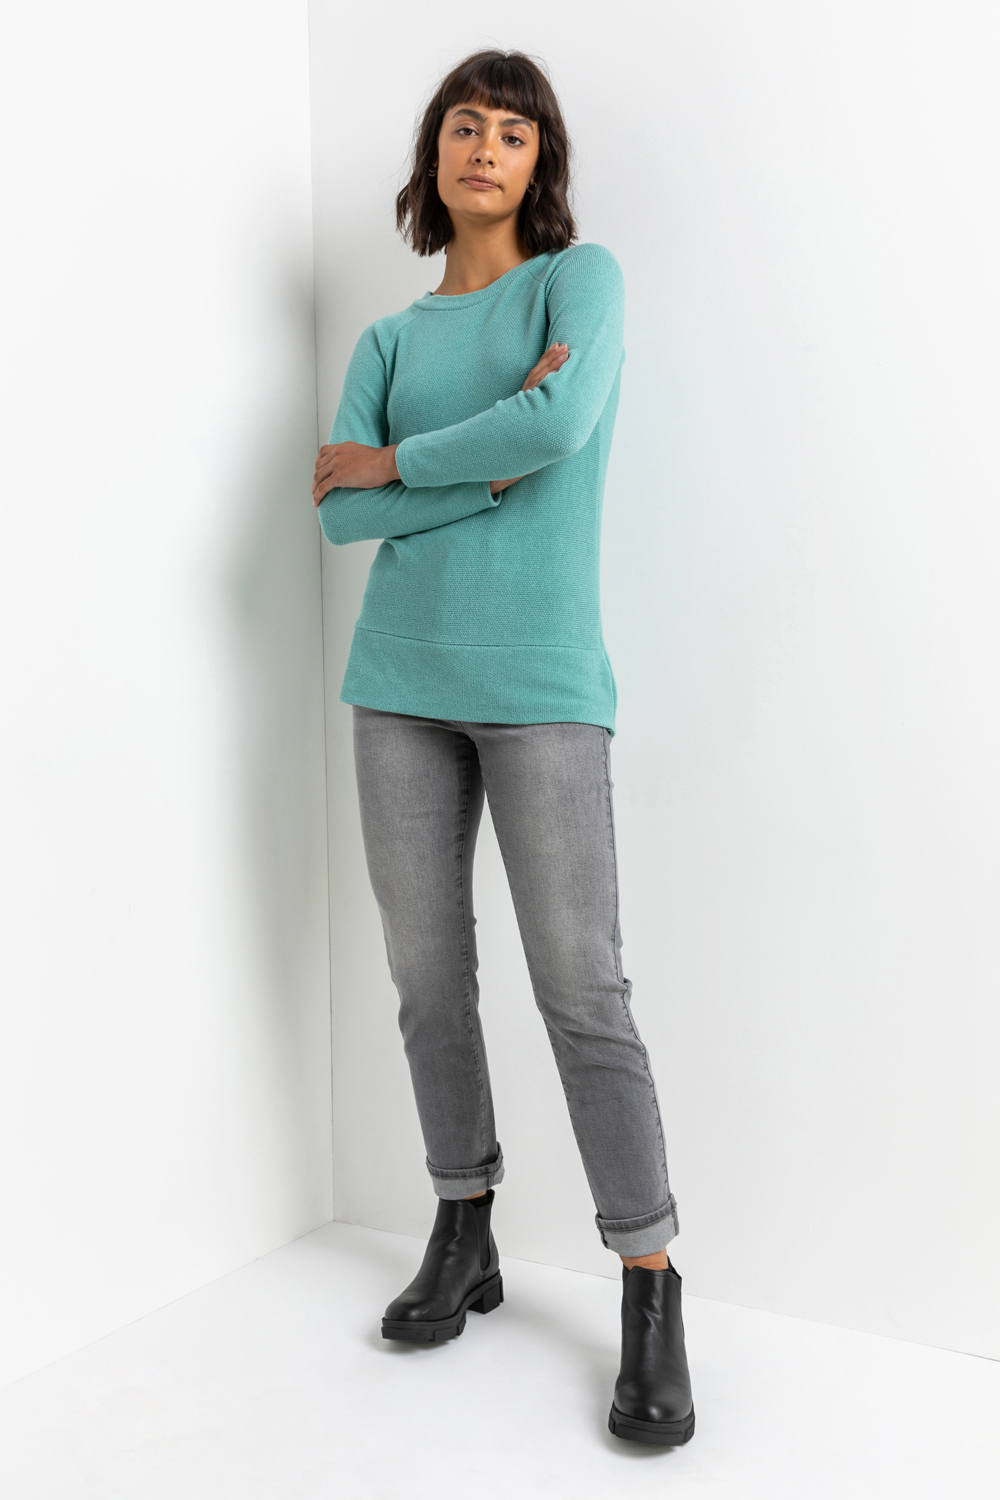 Mint Soft Jersey Sweatshirt with Necklace, Image 3 of 5